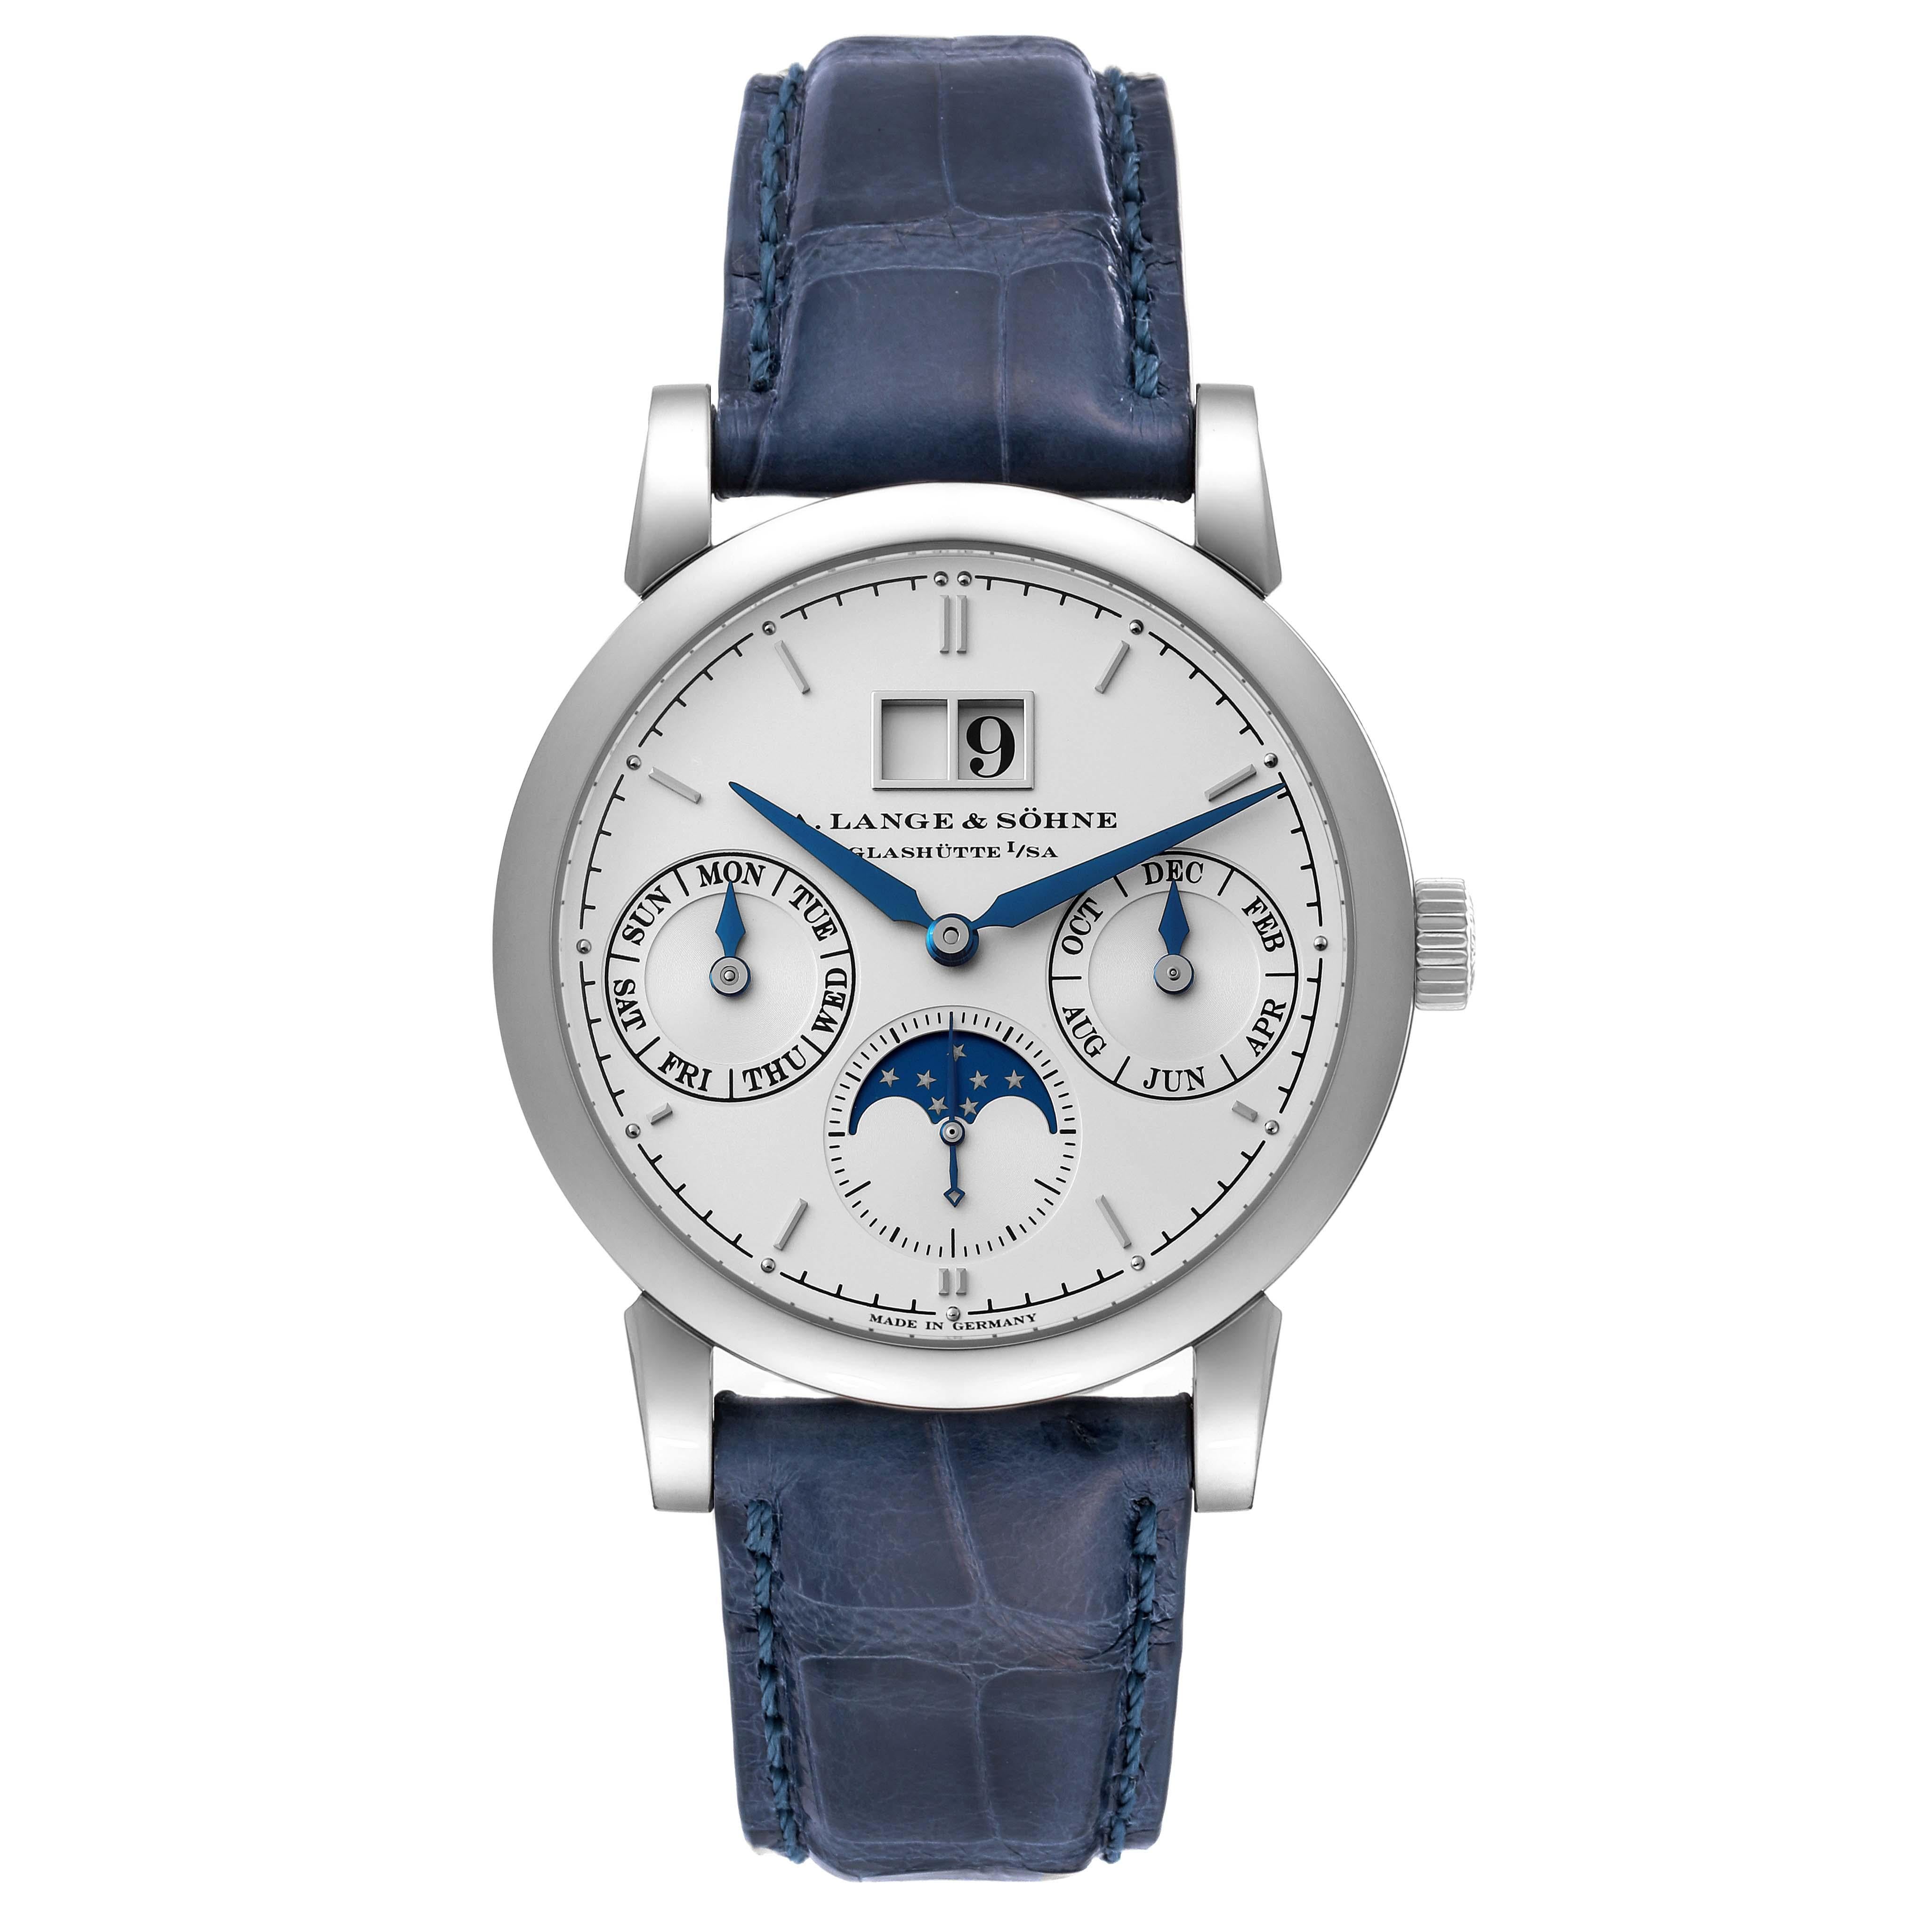 Men's A. Lange and Sohne Saxonia Annual Calendar White Gold Mens Watch 330.026 For Sale